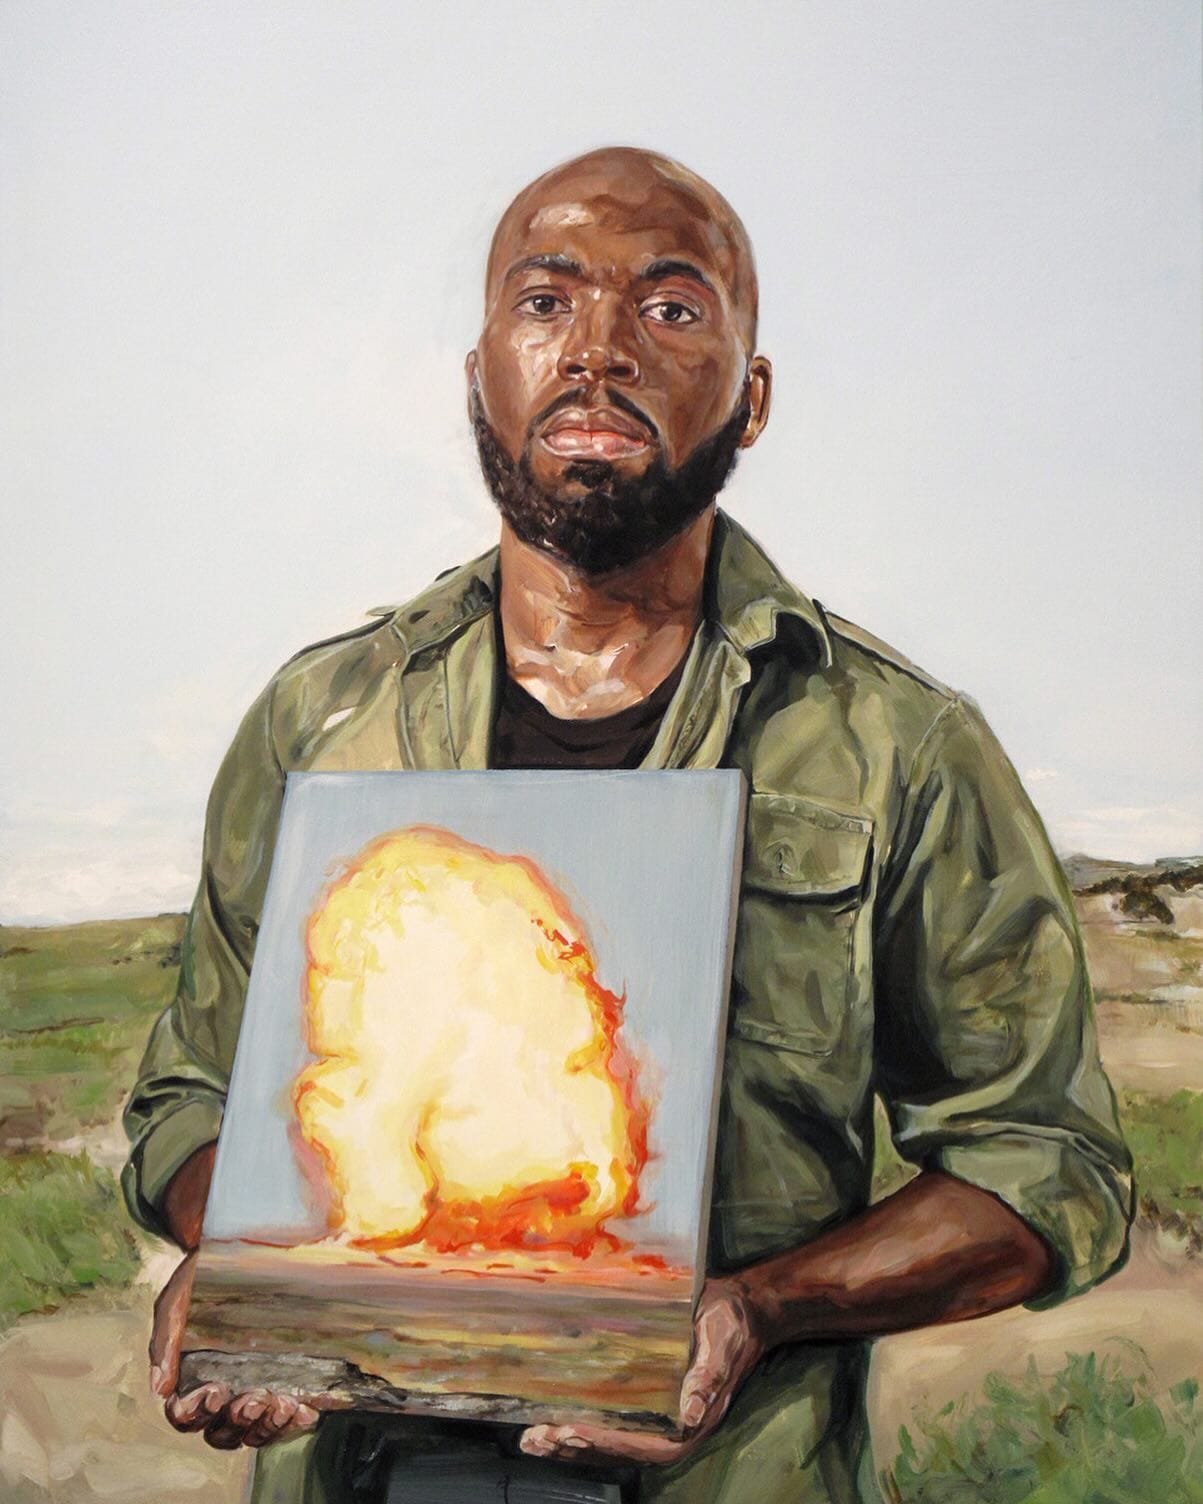 A painting of a man holding a canvas with a fire mushroom cloud.